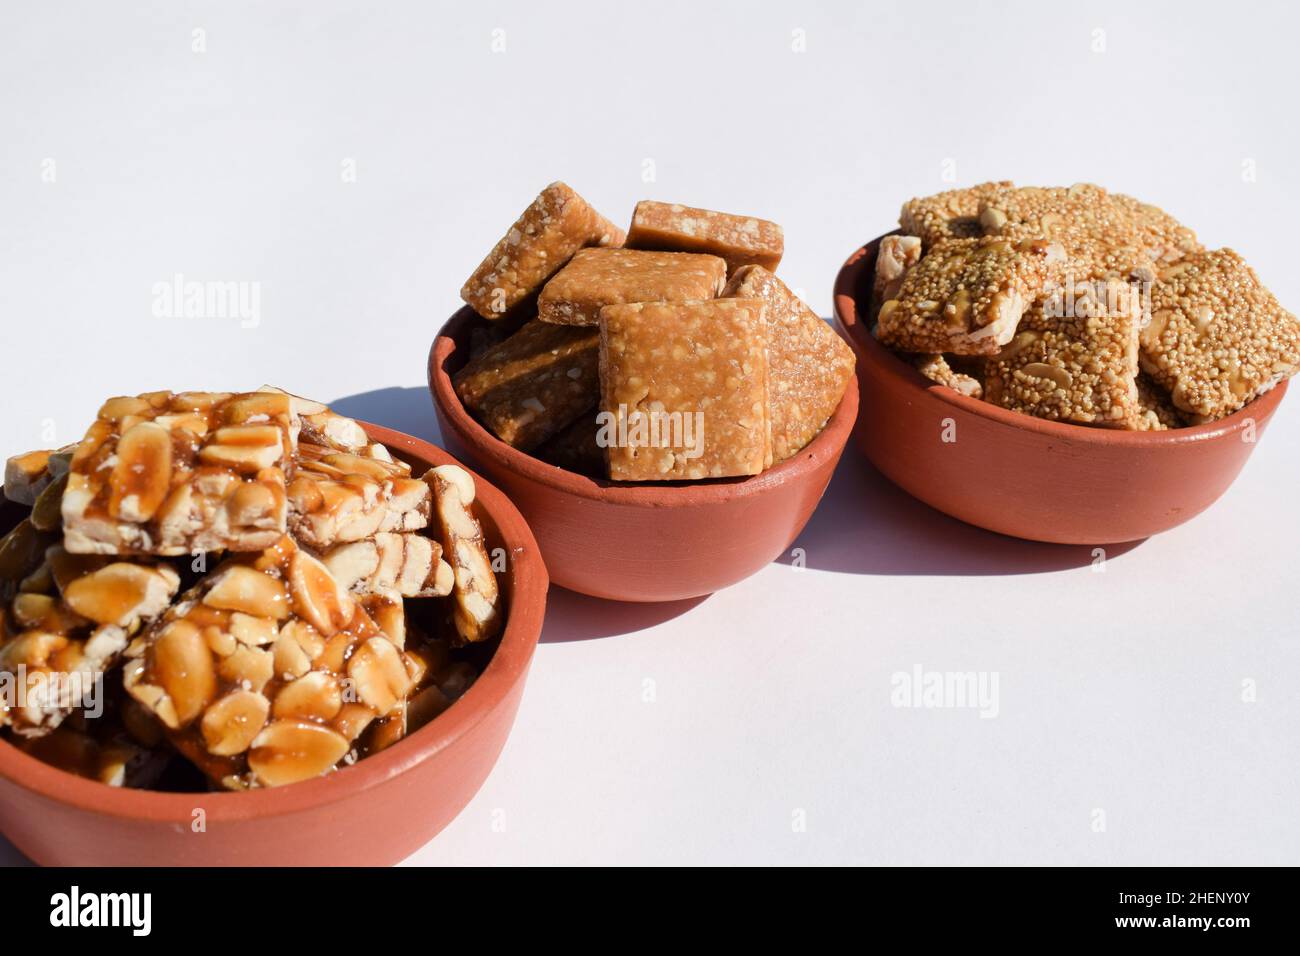 Peanut chikki, Crushed roaste peanut chiki, Rajgiri chikki or Amaranth brittle bars. Jaggery with peanut candy bars served in earthen bowls pot during Stock Photo